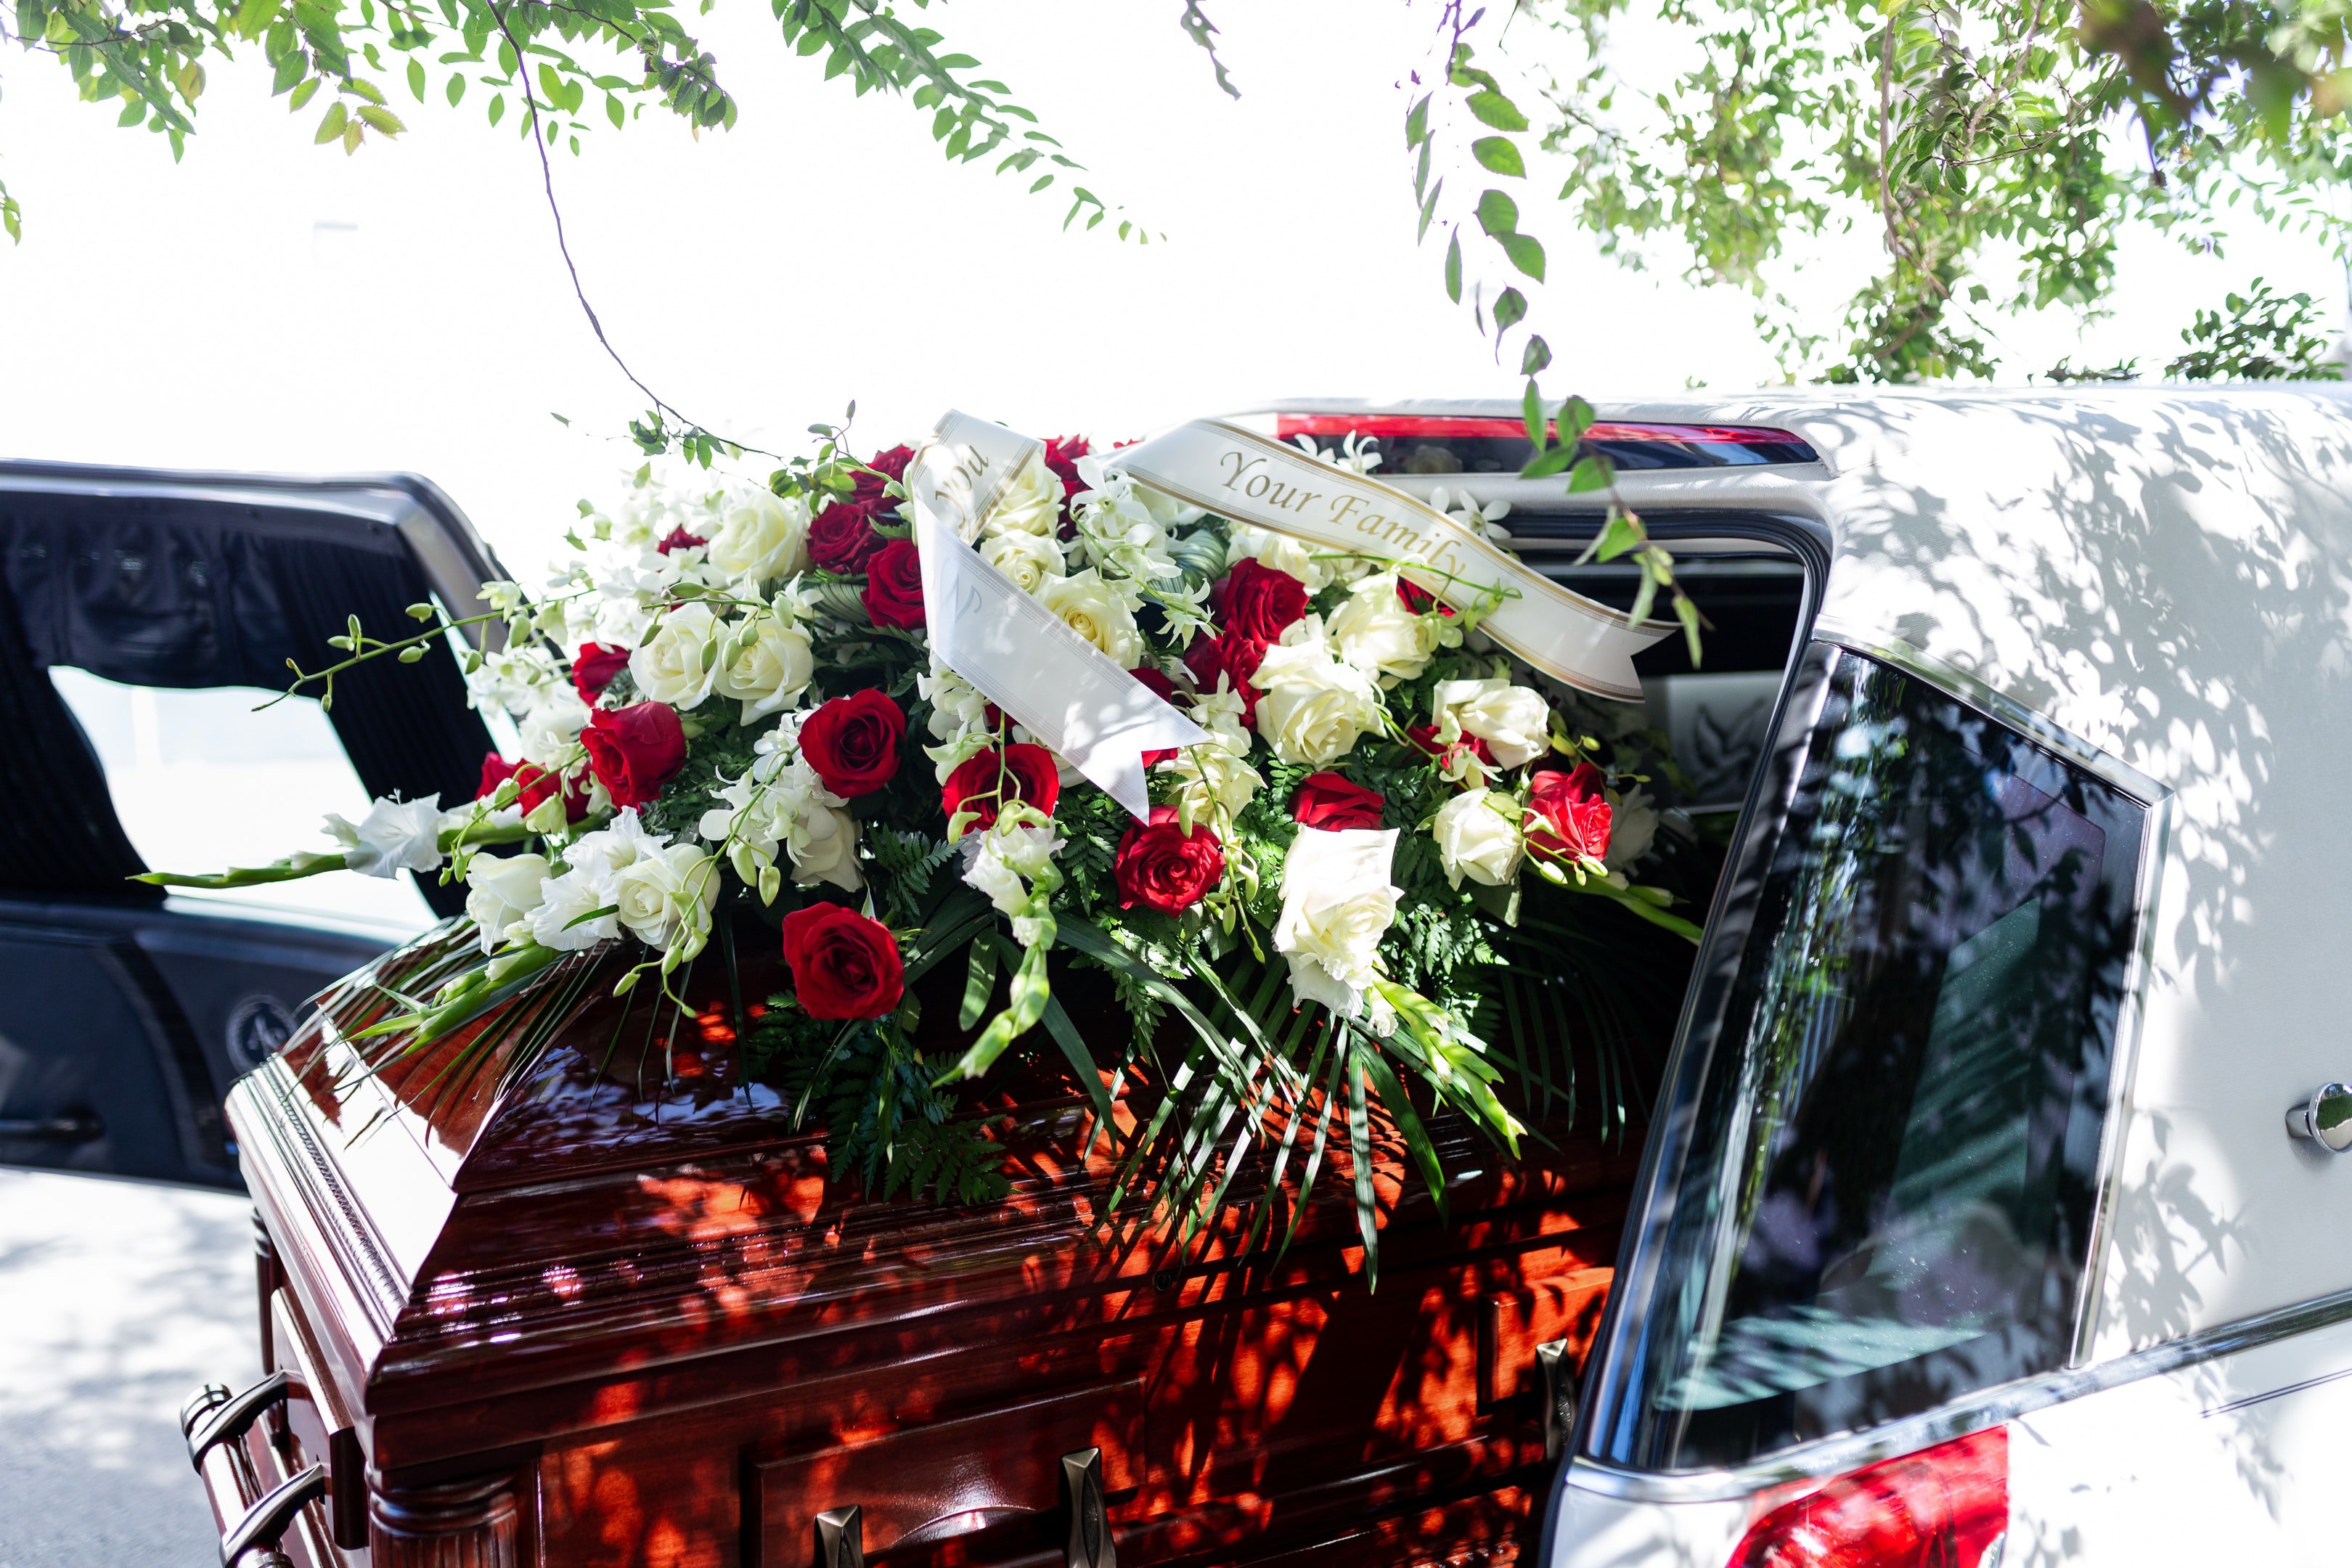 Holly couldn't remember Amy's funeral. | Source: Unsplash